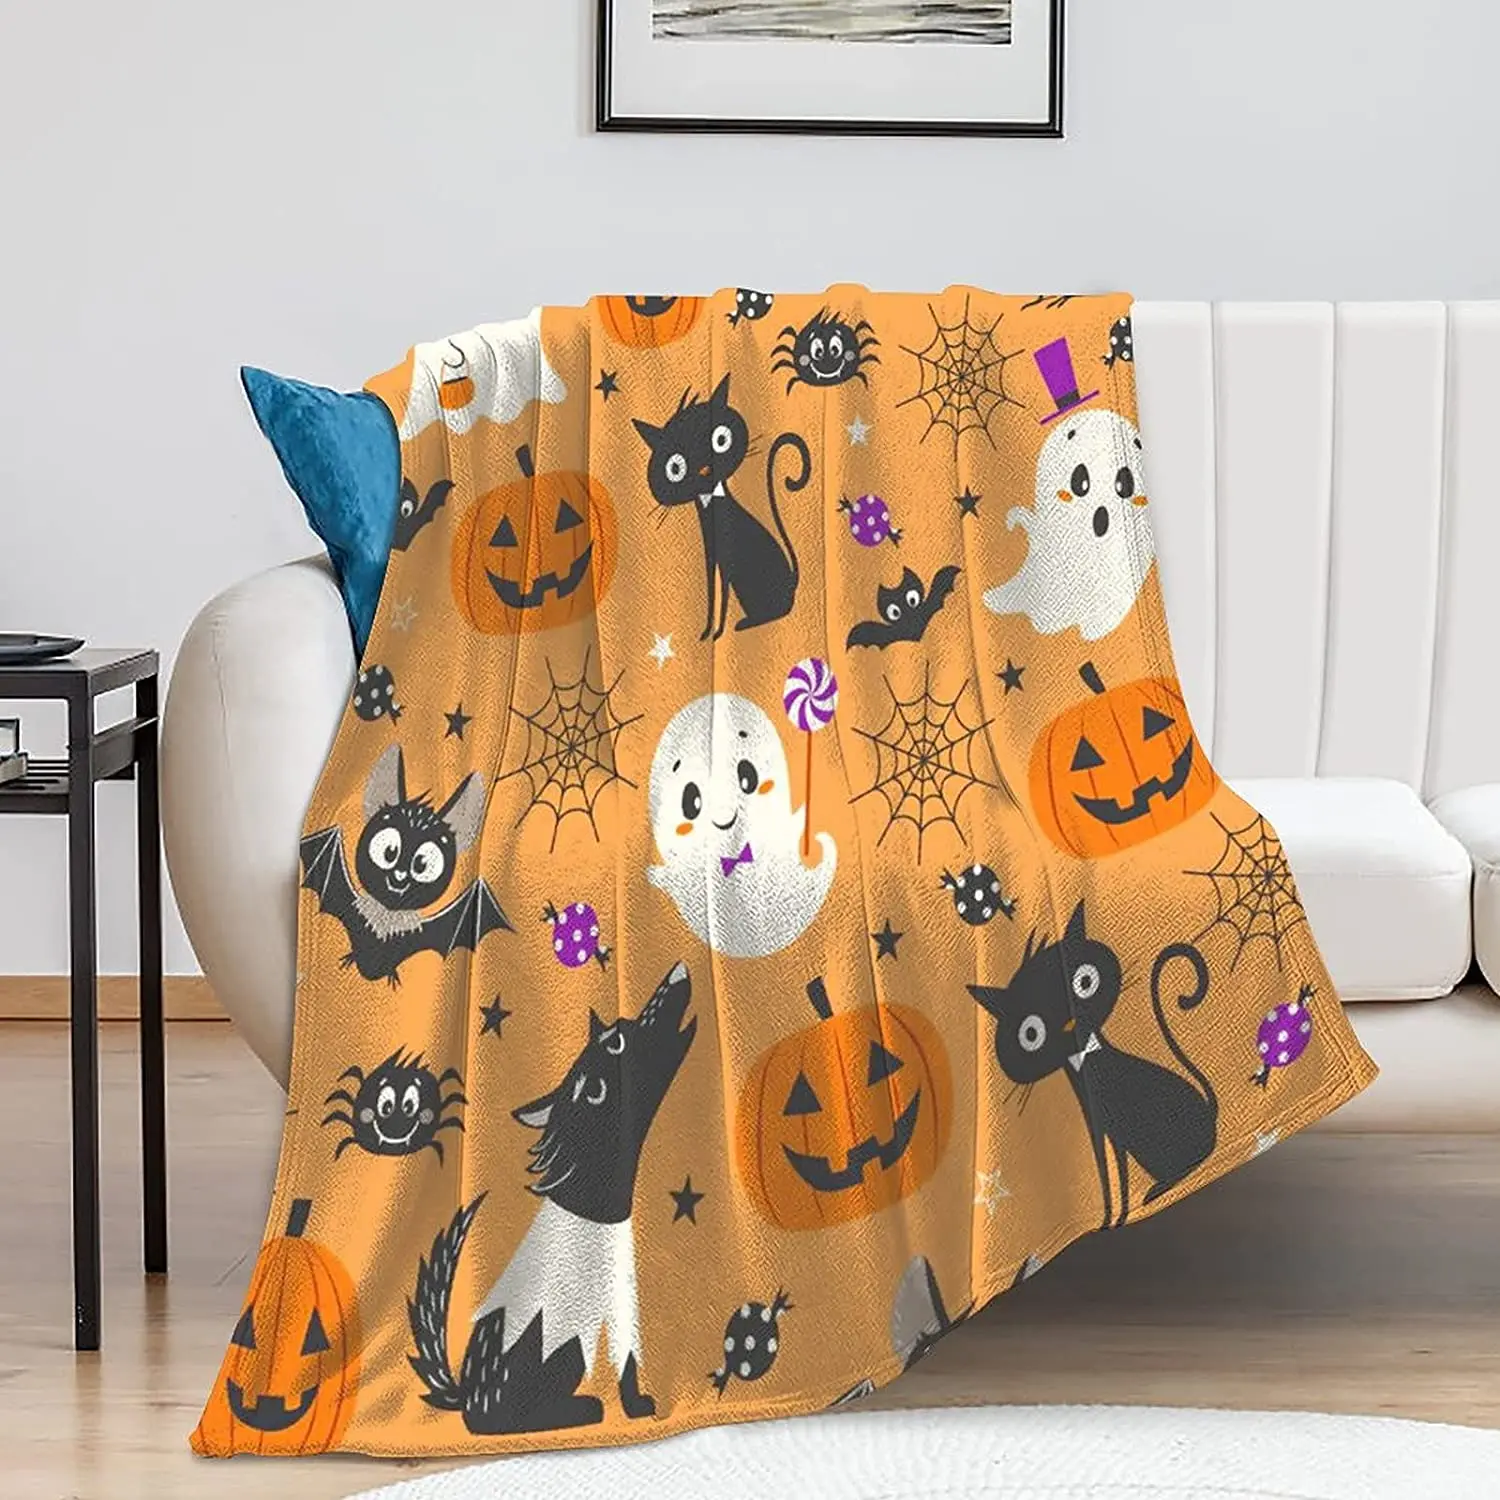 

Halloween Pumpkin Cat Ghost Bat Spider Web Candy Blanket for Couch Super Warm Soft Cozy for Kids Adults Orange Blanket for Sofa